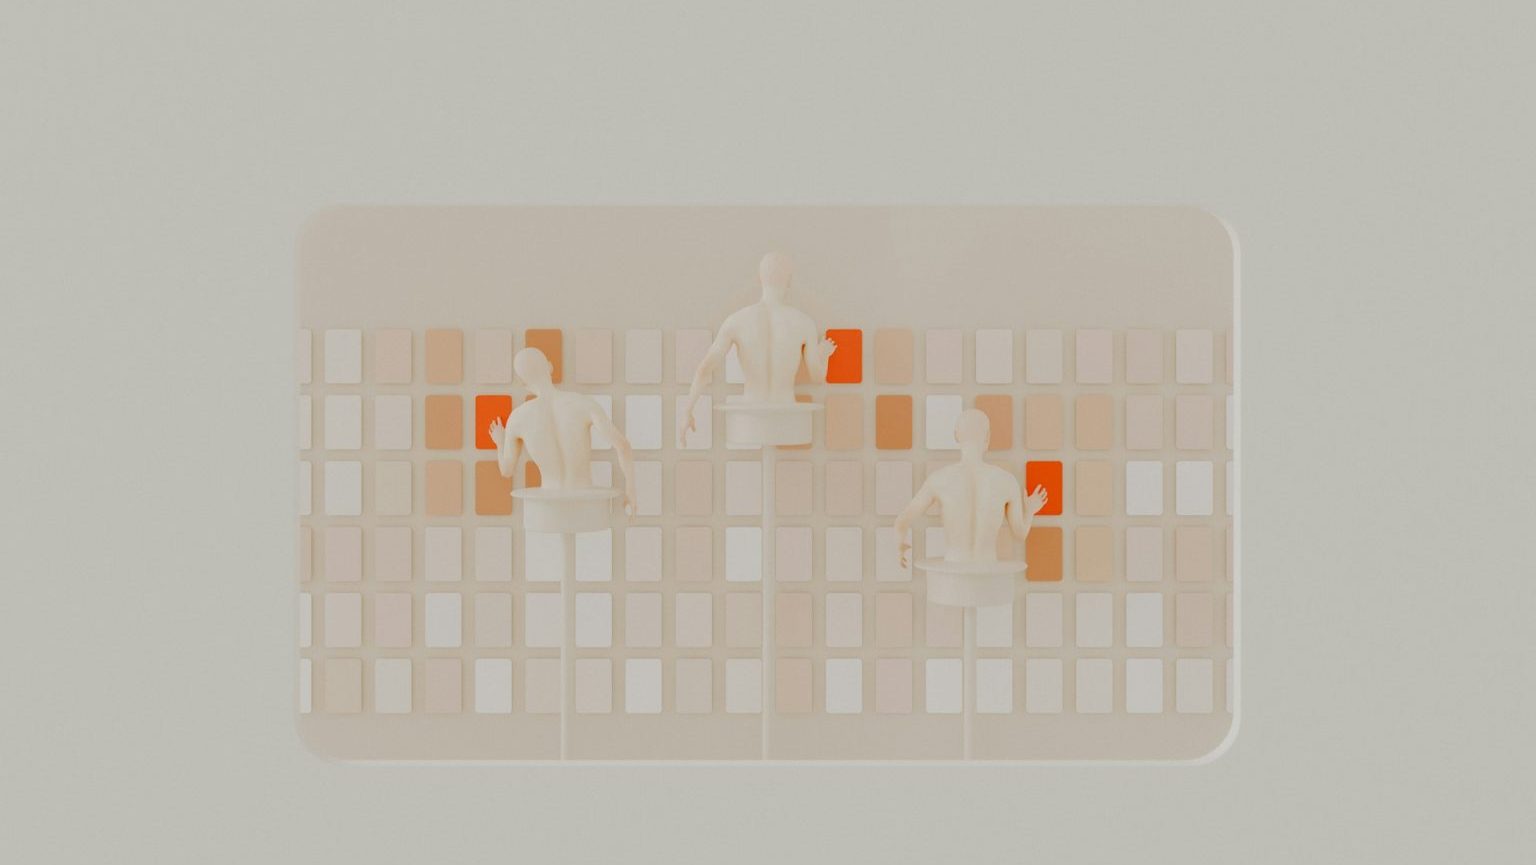 Three minimalistic white figurines sit on small platforms in front of a grid of squares, some orange, on a light grey background.